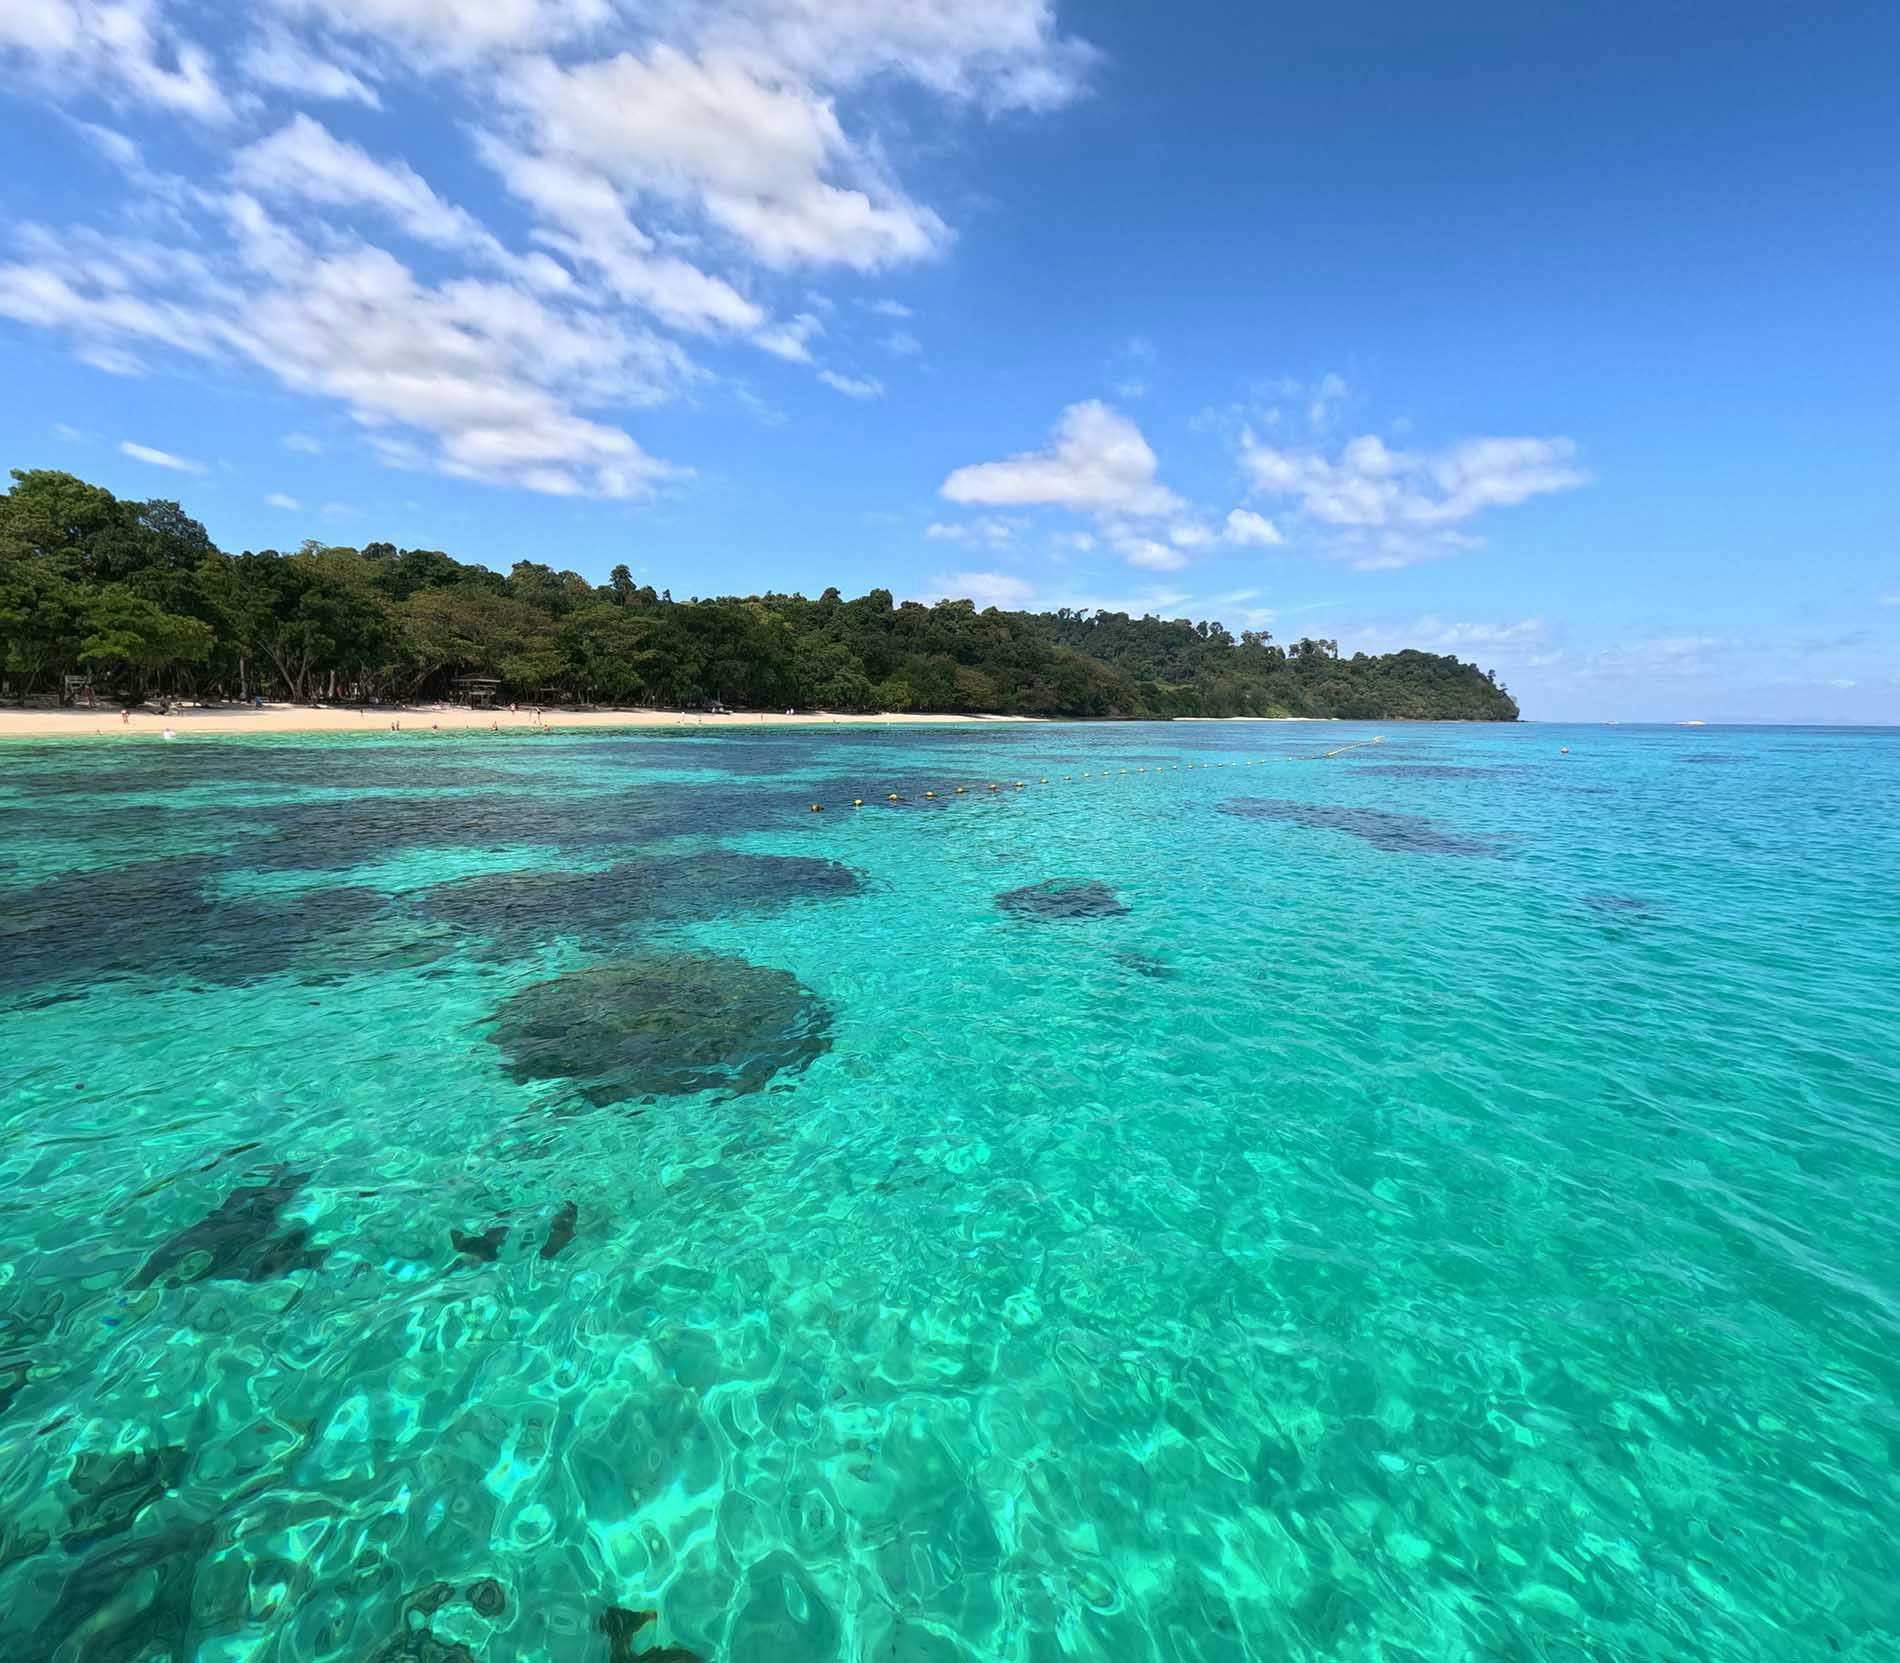 Sea water and view of white sandy beach with jungle in the background at Koh Rok, an island in the Gulf of Thailand.